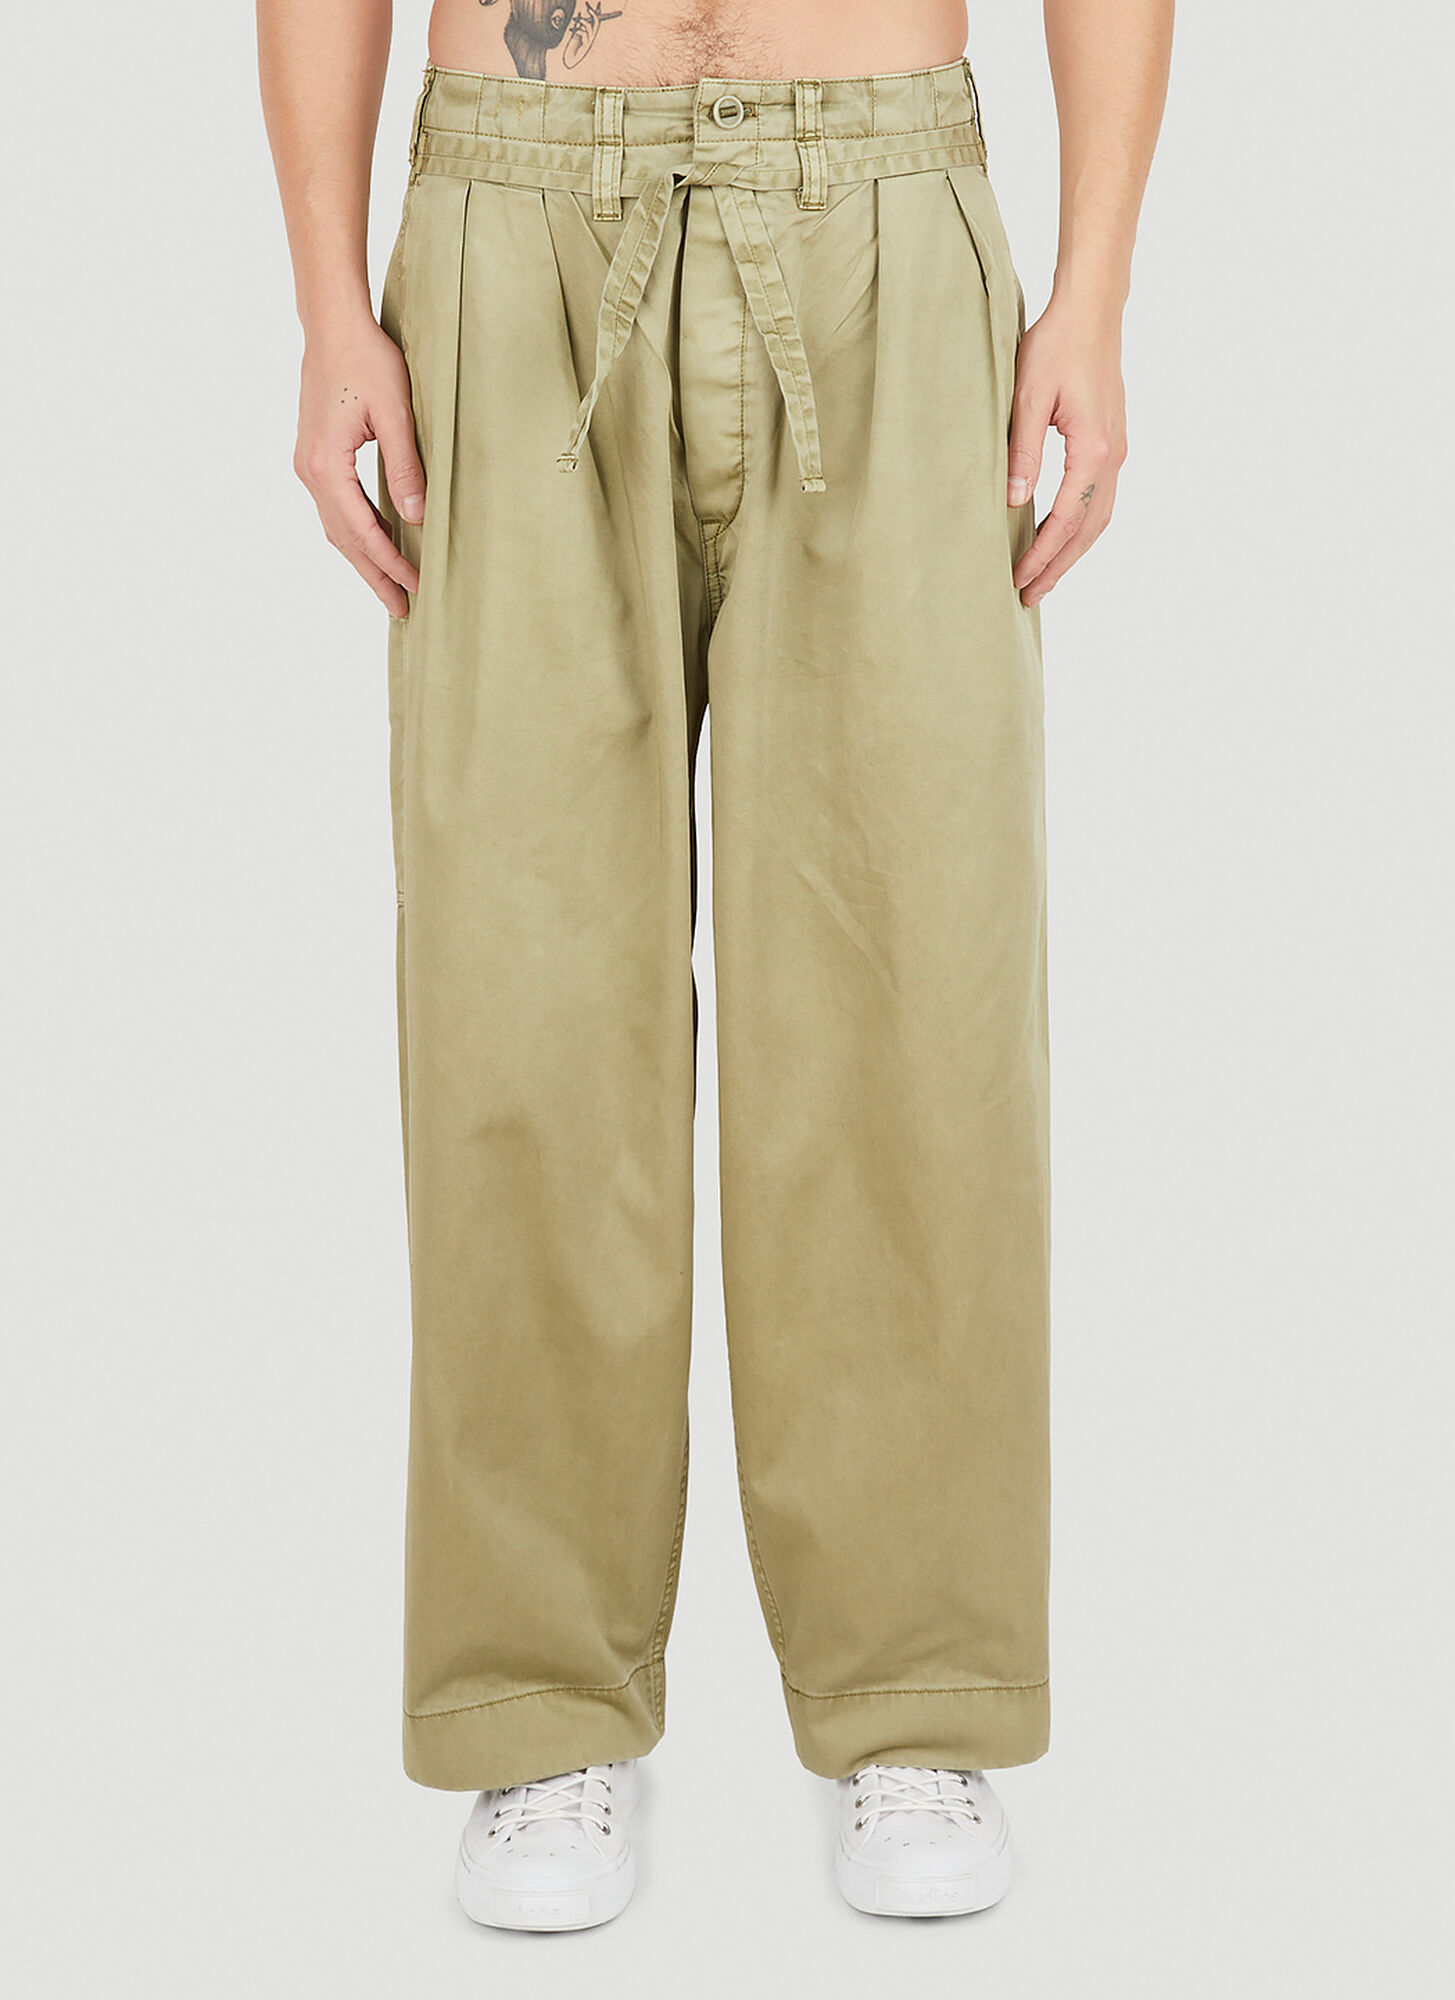 Applied Art Forms Sculpture Trousers In Khaki